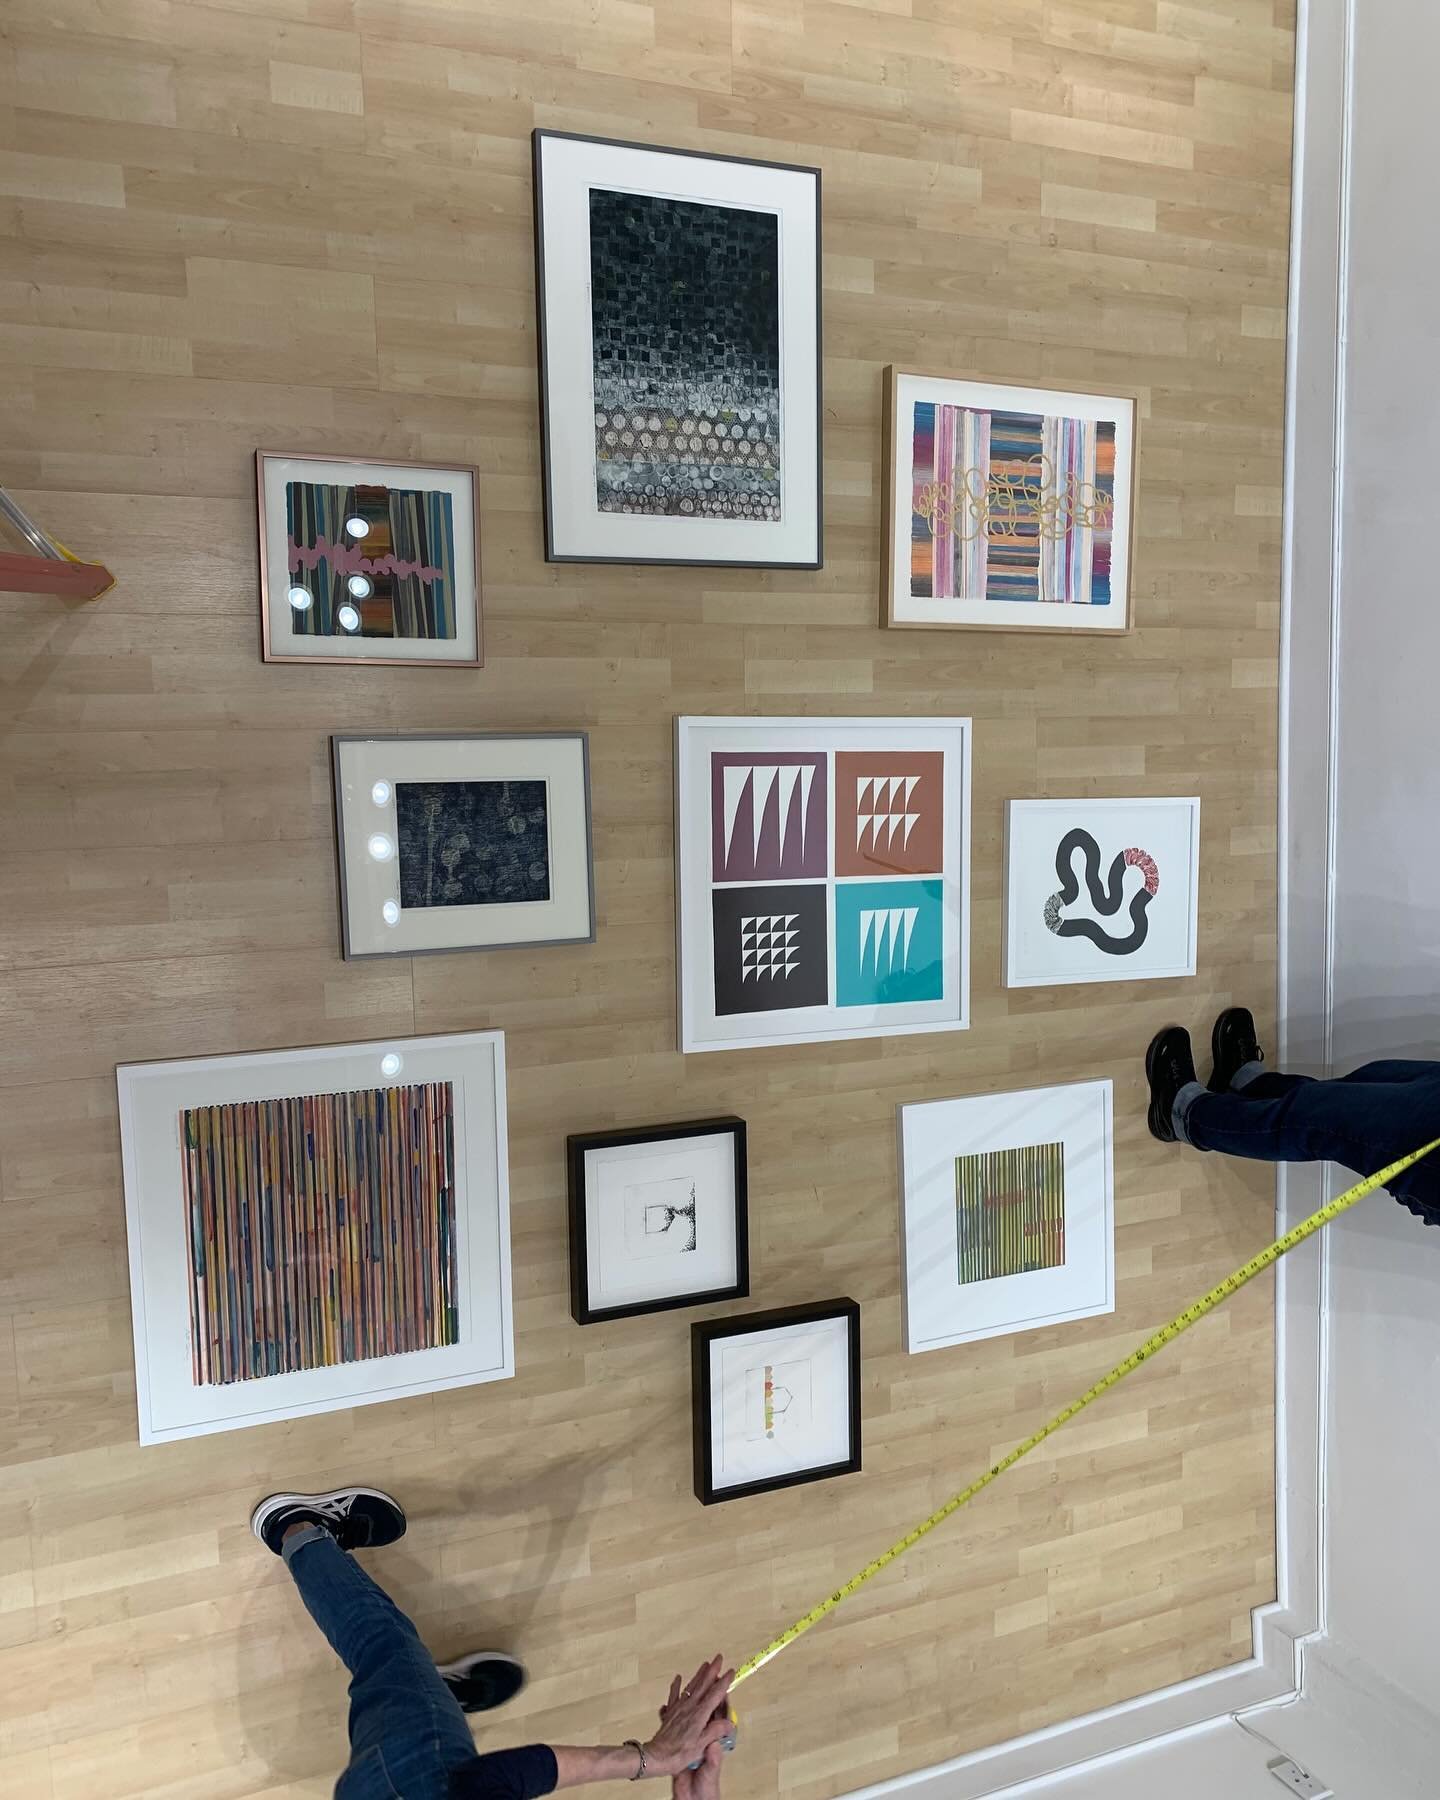 We&rsquo;ve been busy! @gwenaveril @bdorsey48 @ingridartworks @pattyssketches @deantrisko install sneak peek!

Permutations opening this Thursday, May 23 with a reception Saturday from 3-6pm! 

Print works by Beth Dorsey, Gwen Partin, Ingrid Restemay